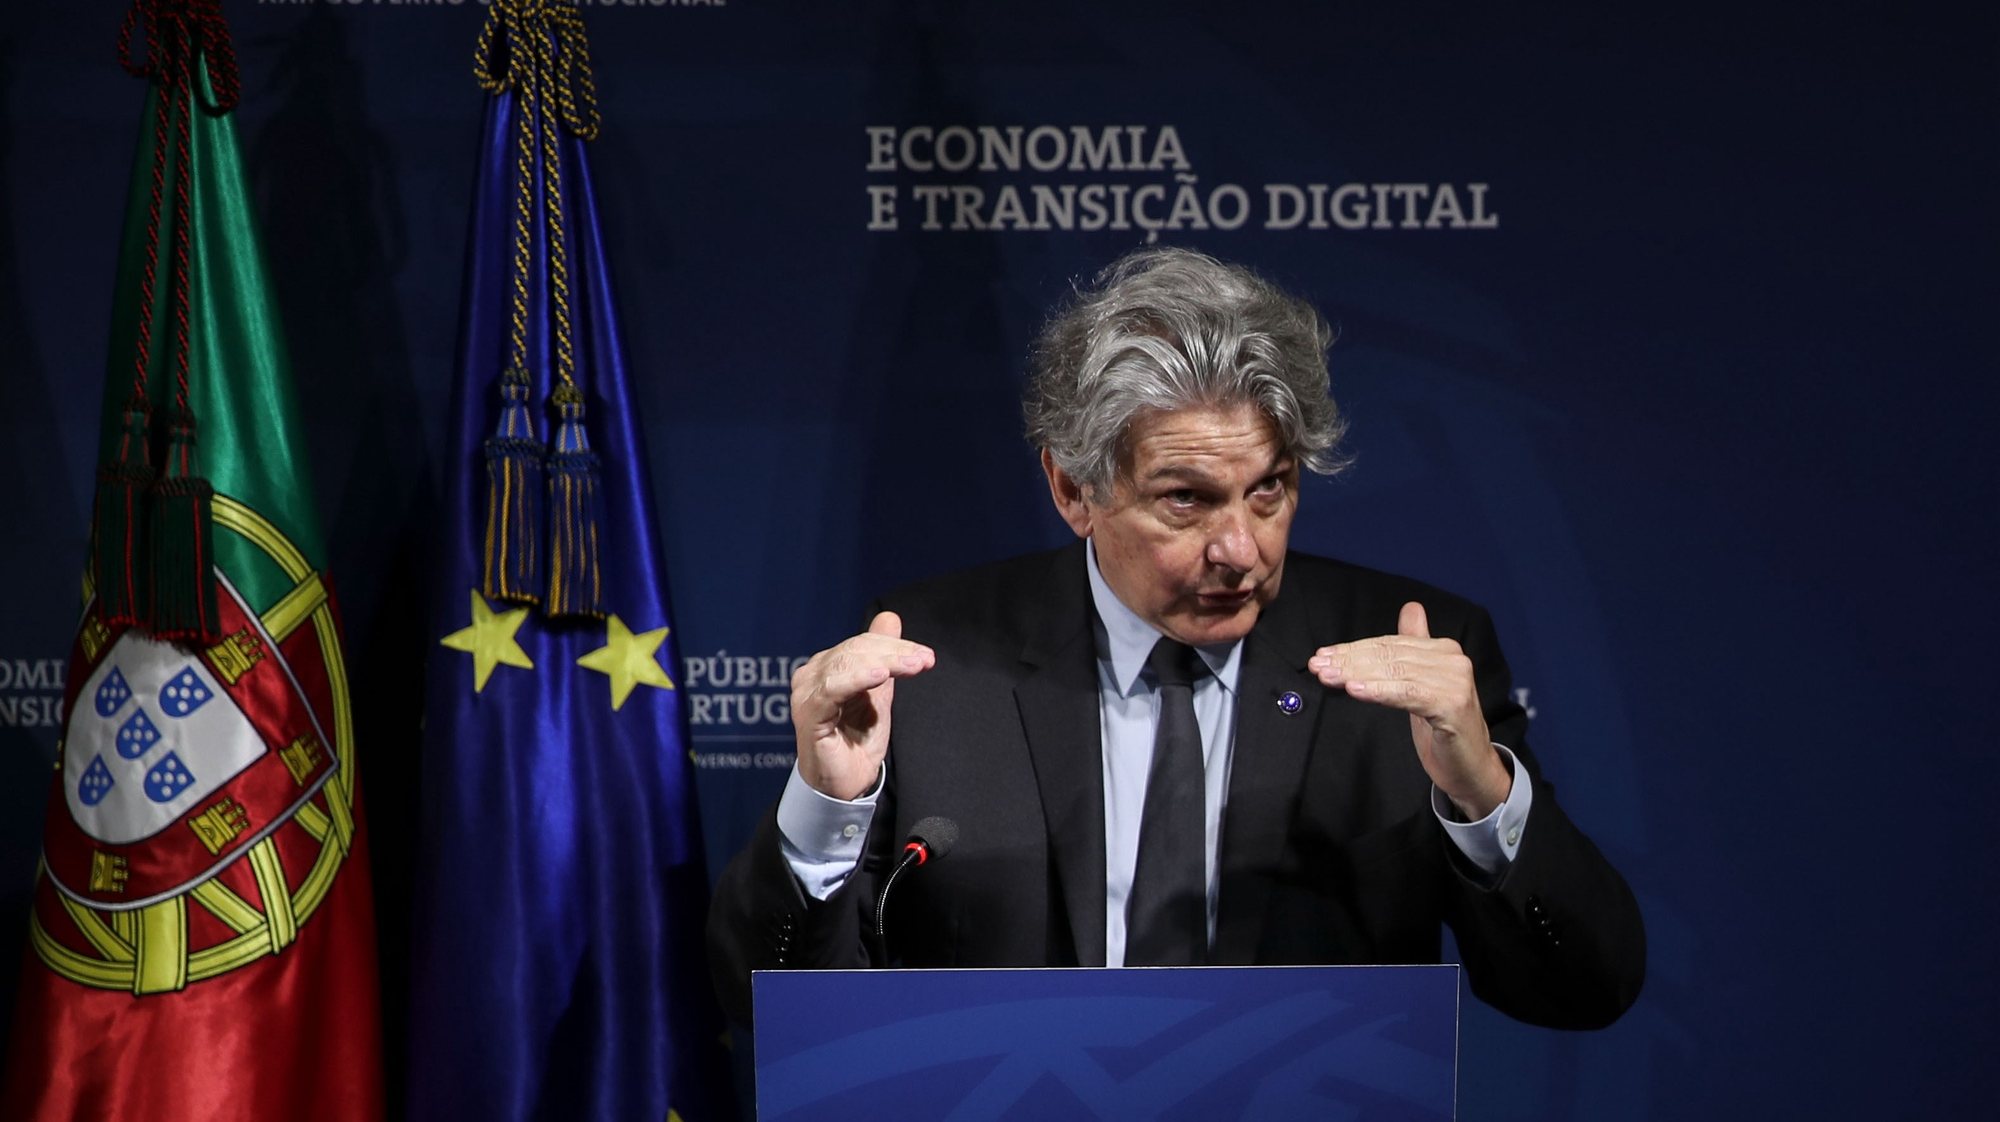 The European Commissioner for Internal Market, Thierry Breton, during the joint press conference with the Minister of State, Economy and Digital Transition, Pedro Siza Vieira (absent from photo), Lisbon, March 26th 2021.  MANUEL DE ALMEIDA/LUSA